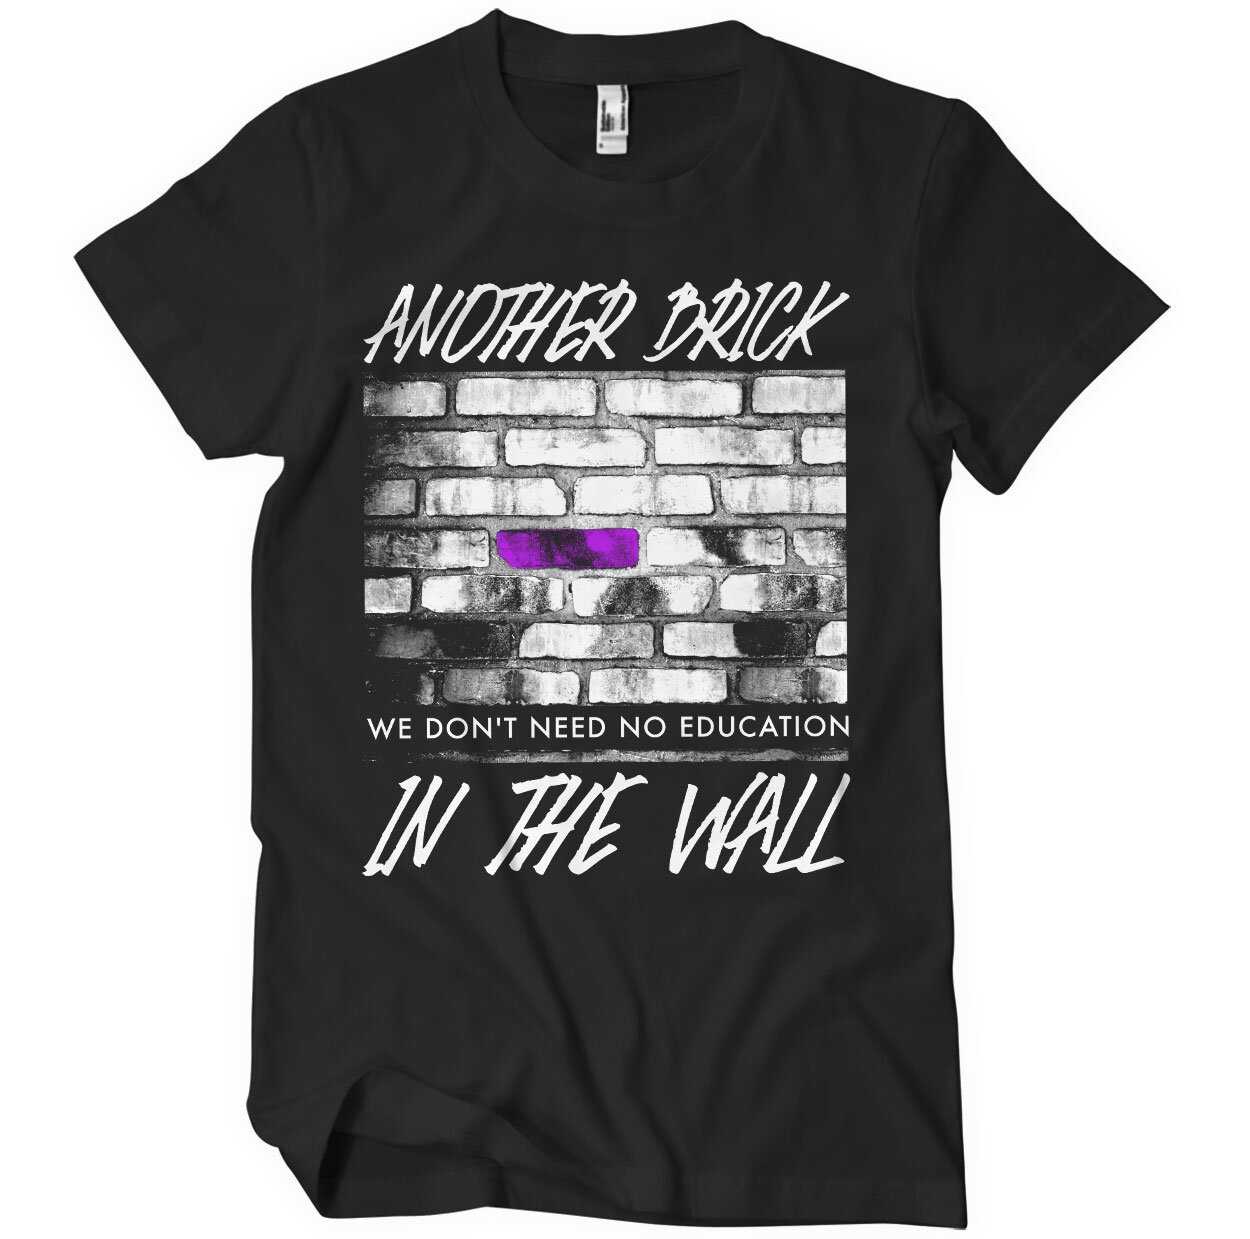 Another Brick In The Wall | Poster